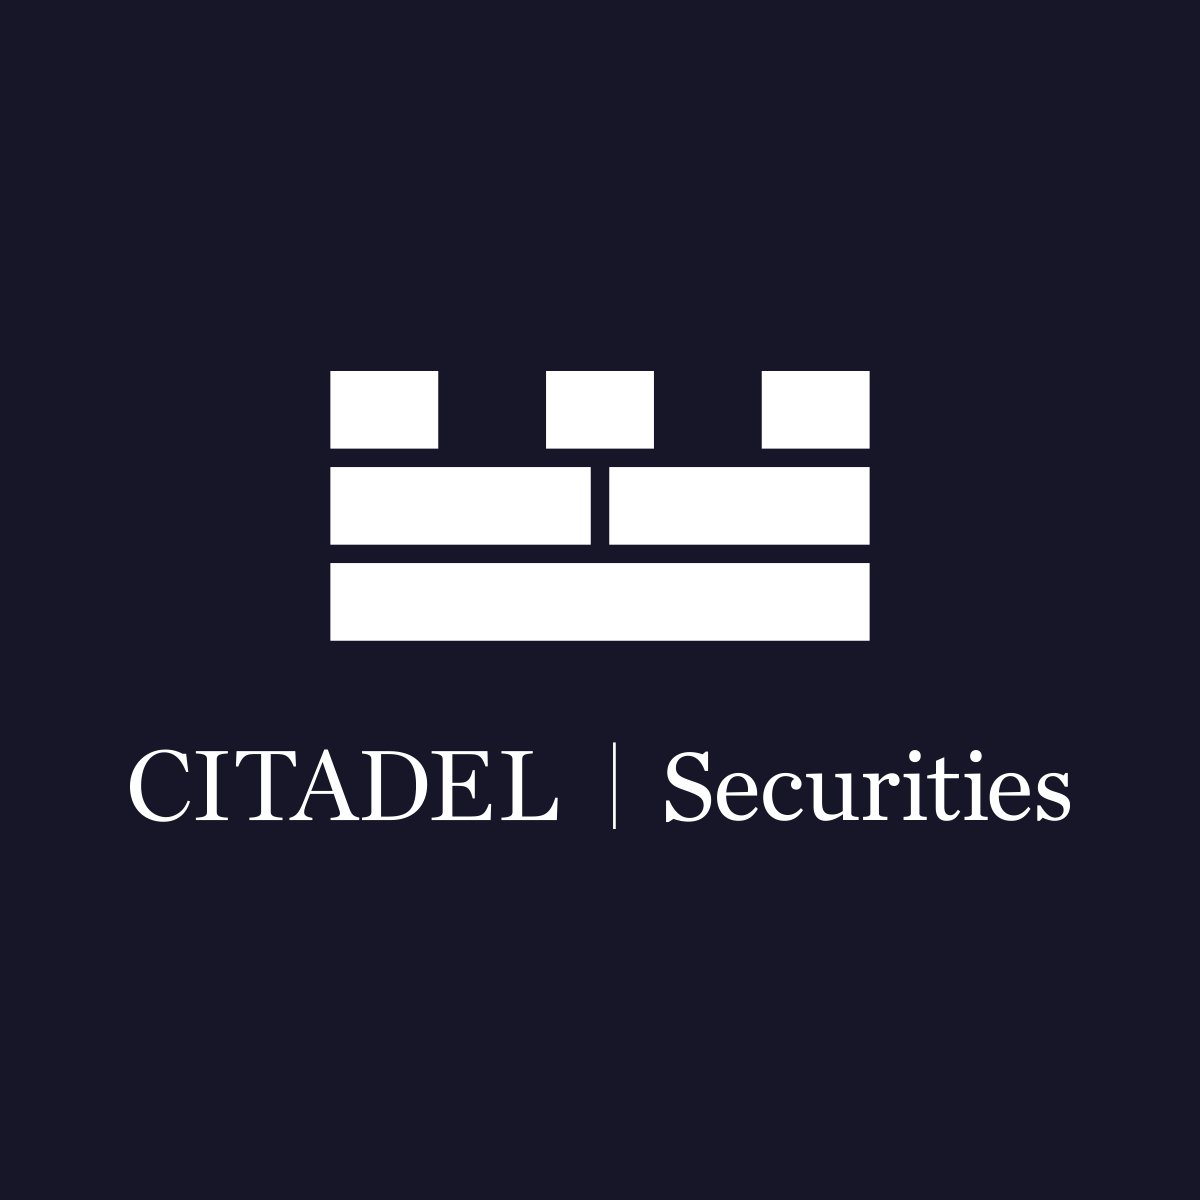 Citadel Securities is a leading global market maker across a broad array of fixed income and equity securities.